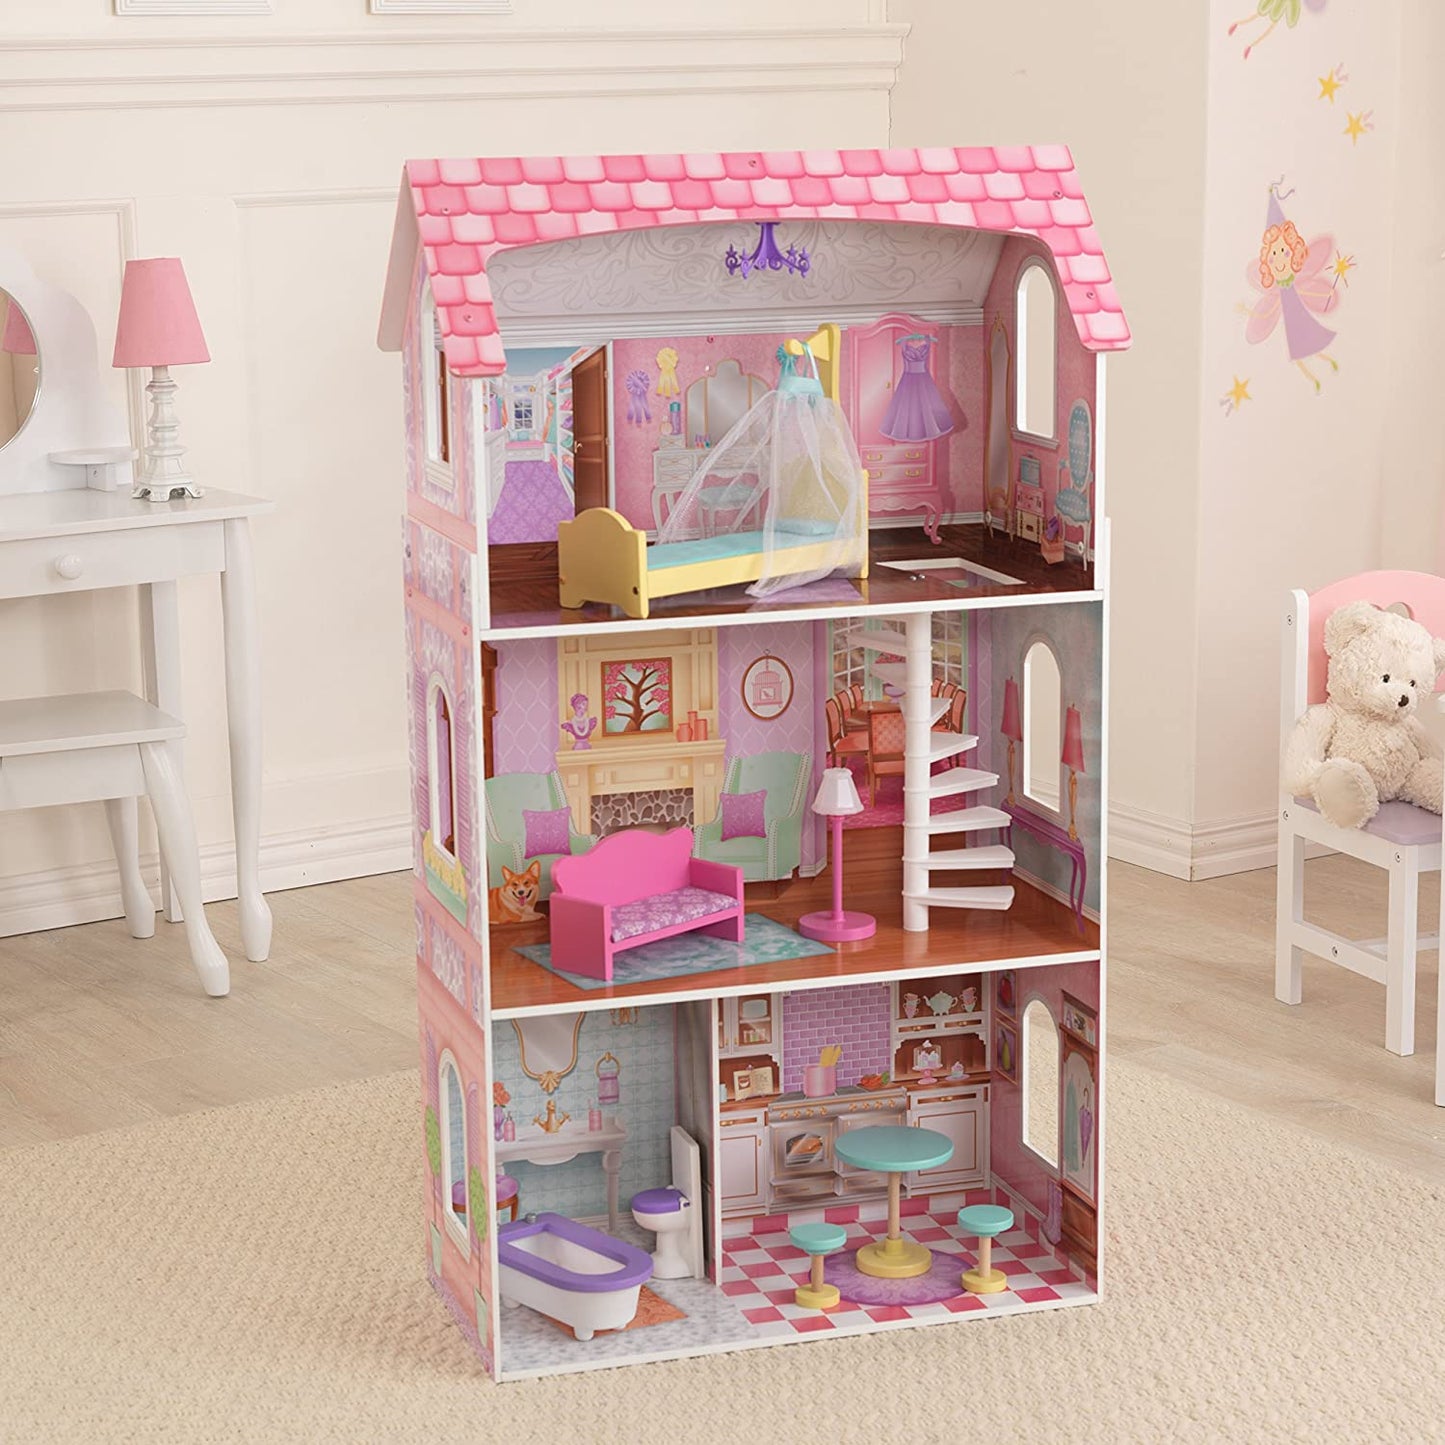 Dollhouse with Furniture for kids 110 x 65 x 33 cm (Model 2) - Little Kids Business